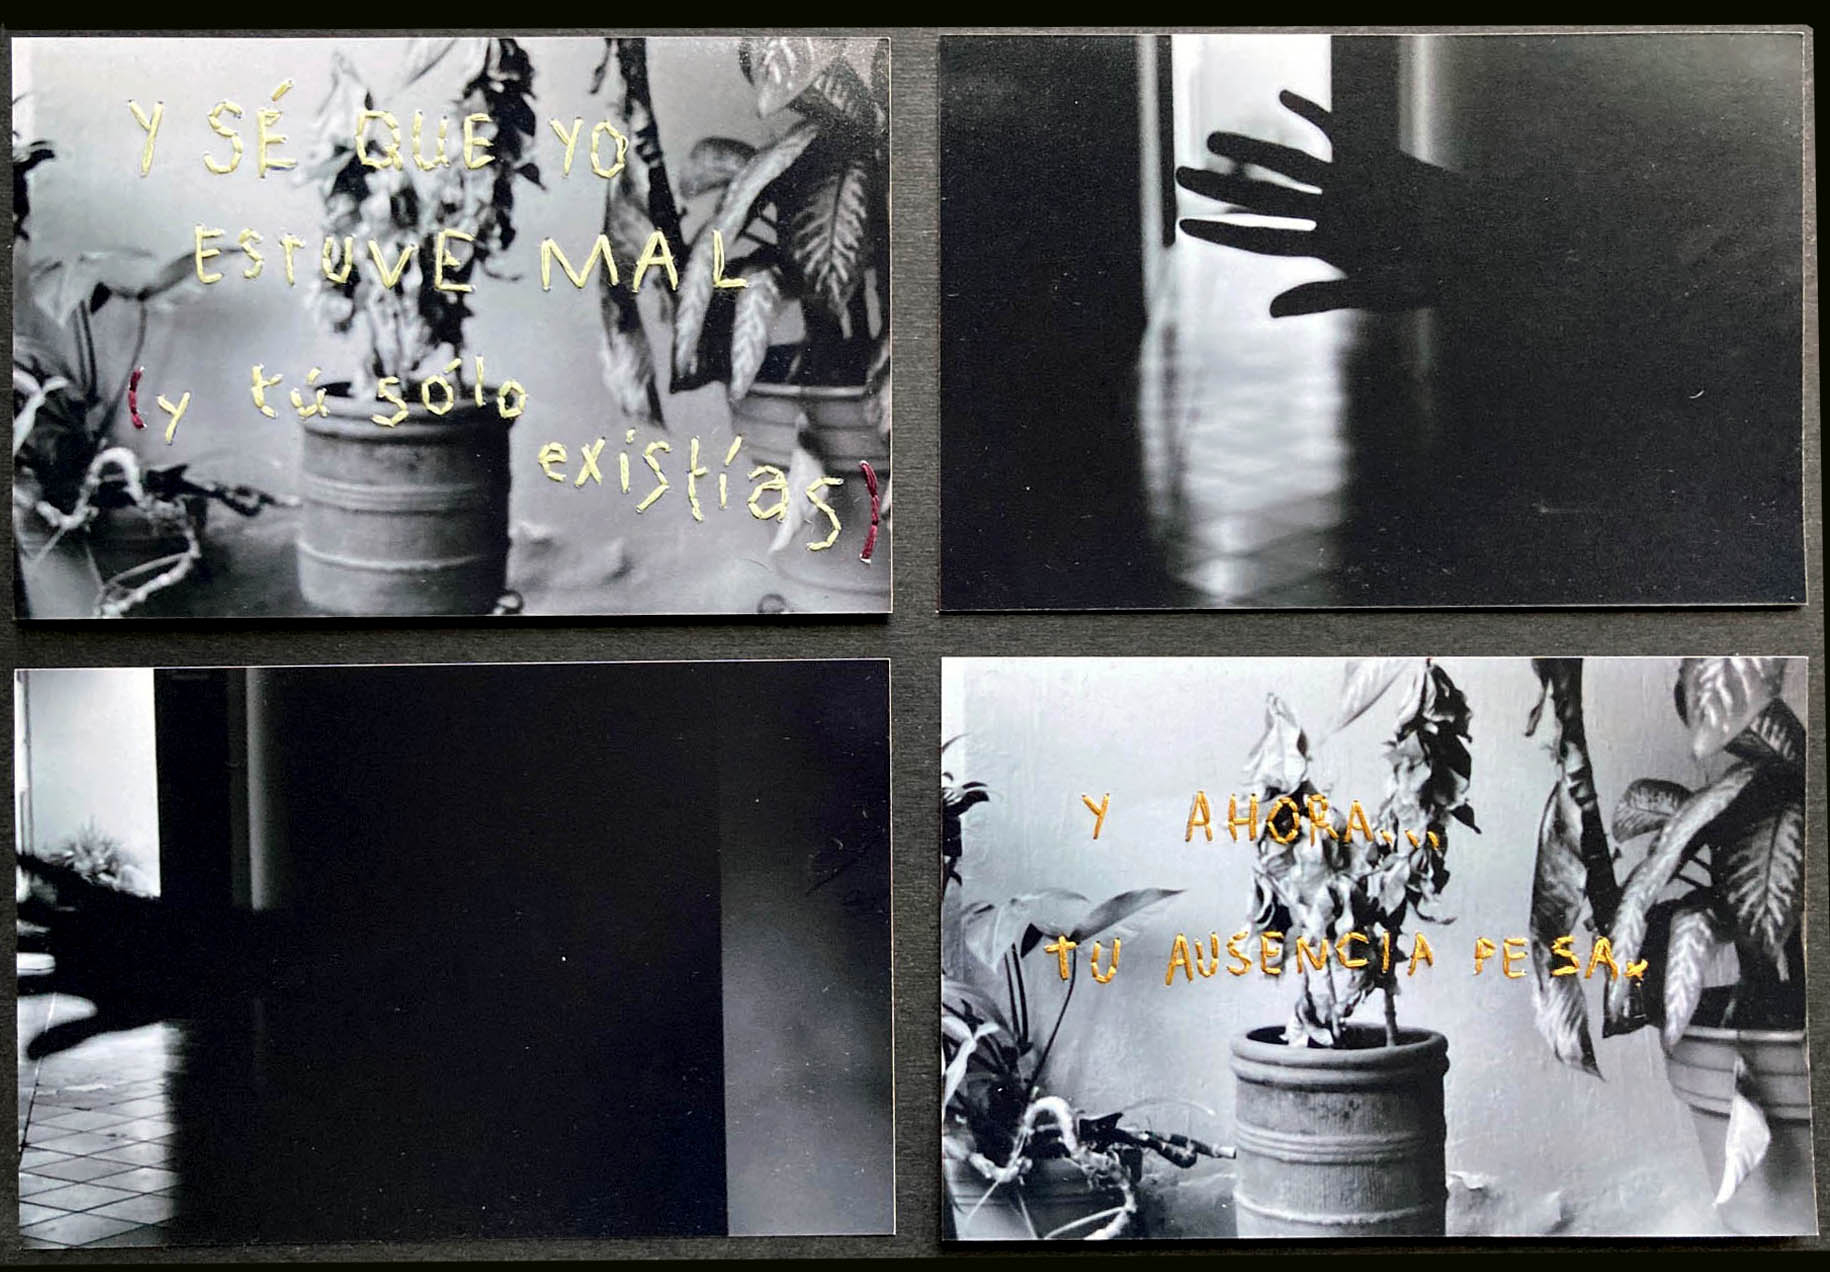 Series of analogue photographies with embroidery texts in Spanish which translates "And I know I was wrong (and you were only there)" and "And now.. your absence weights"